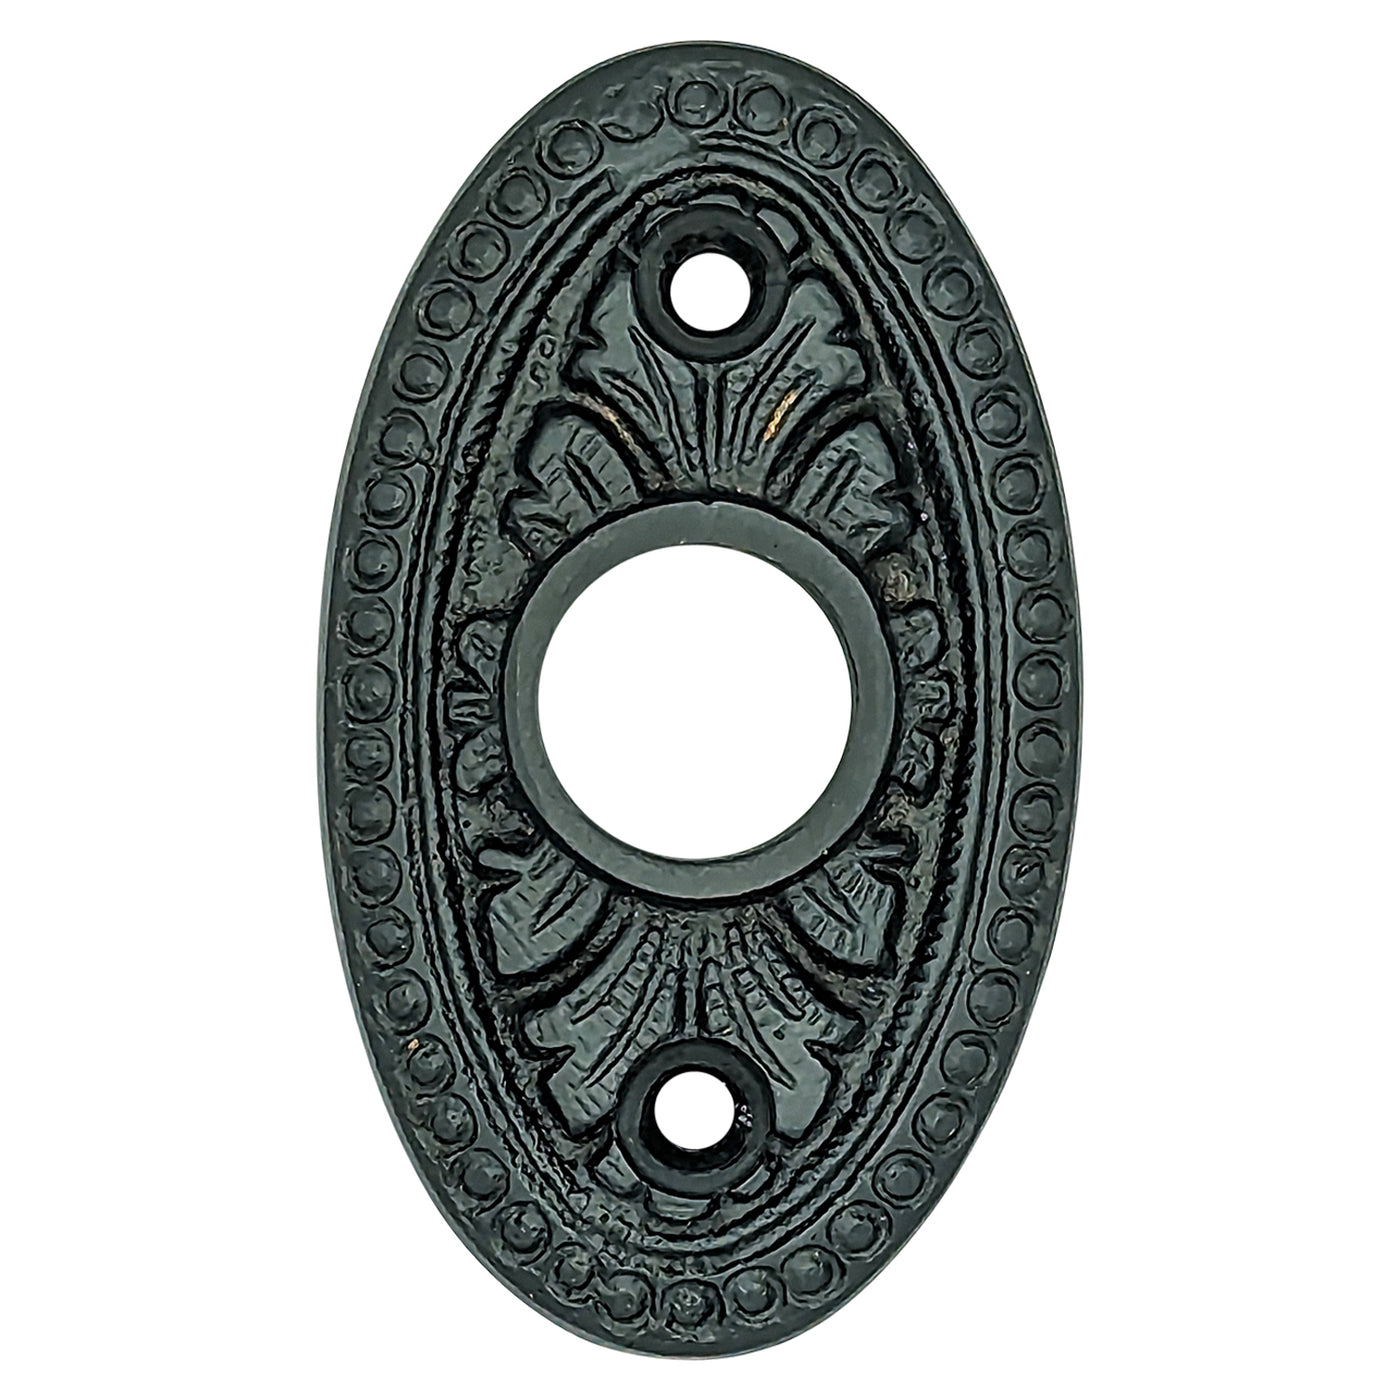 2 5/8 Inch Solid Brass Avalon Style Rosette (Oil Rubbed Bronze Finish)